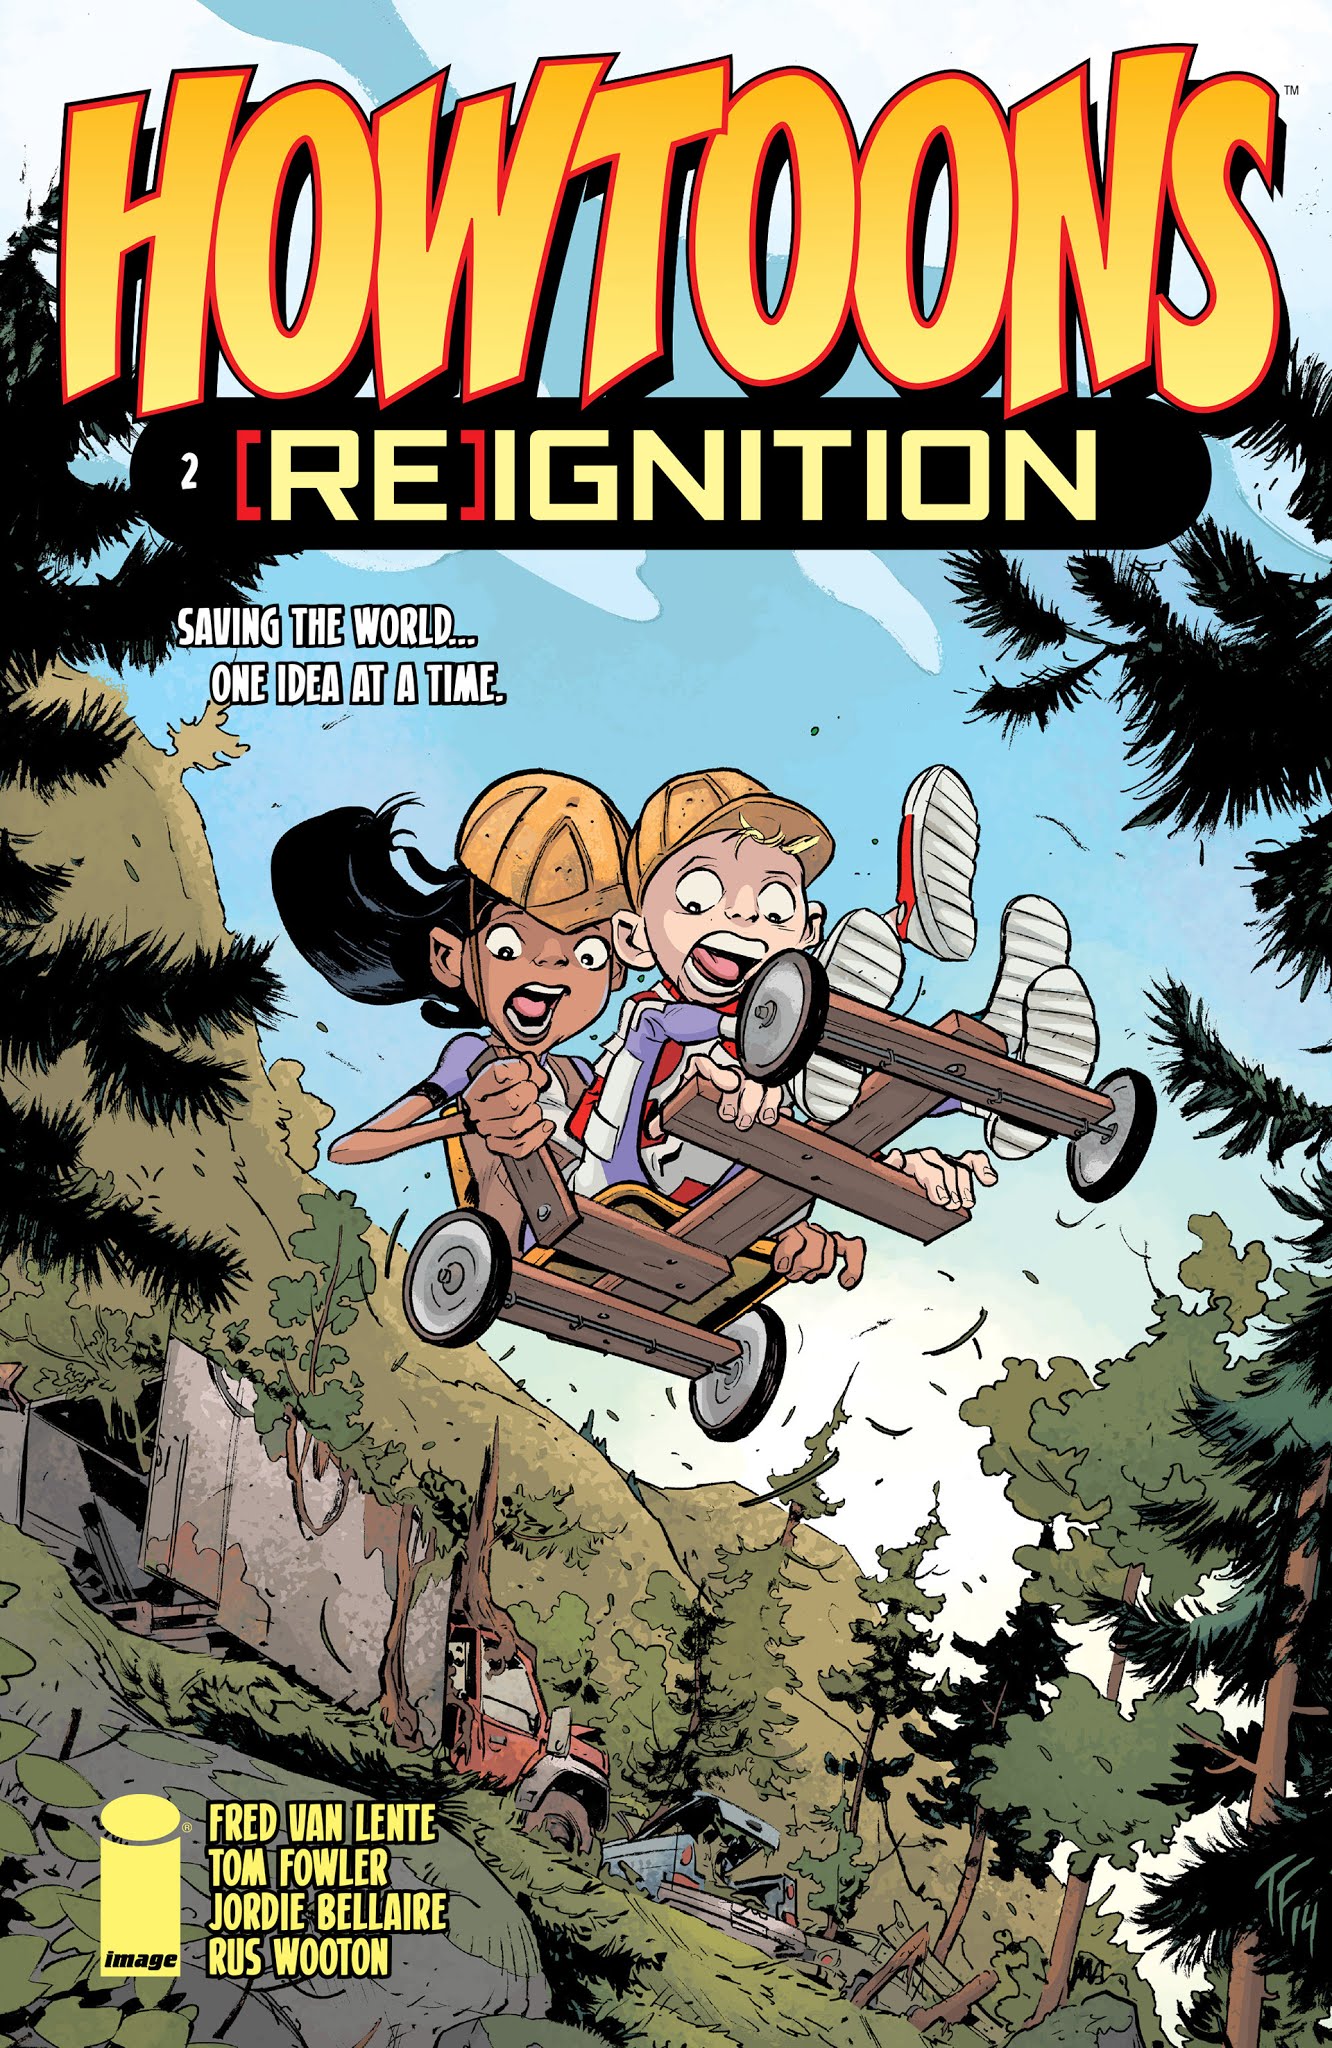 Read online Howtoons [Re]Ignition comic -  Issue #2 - 1